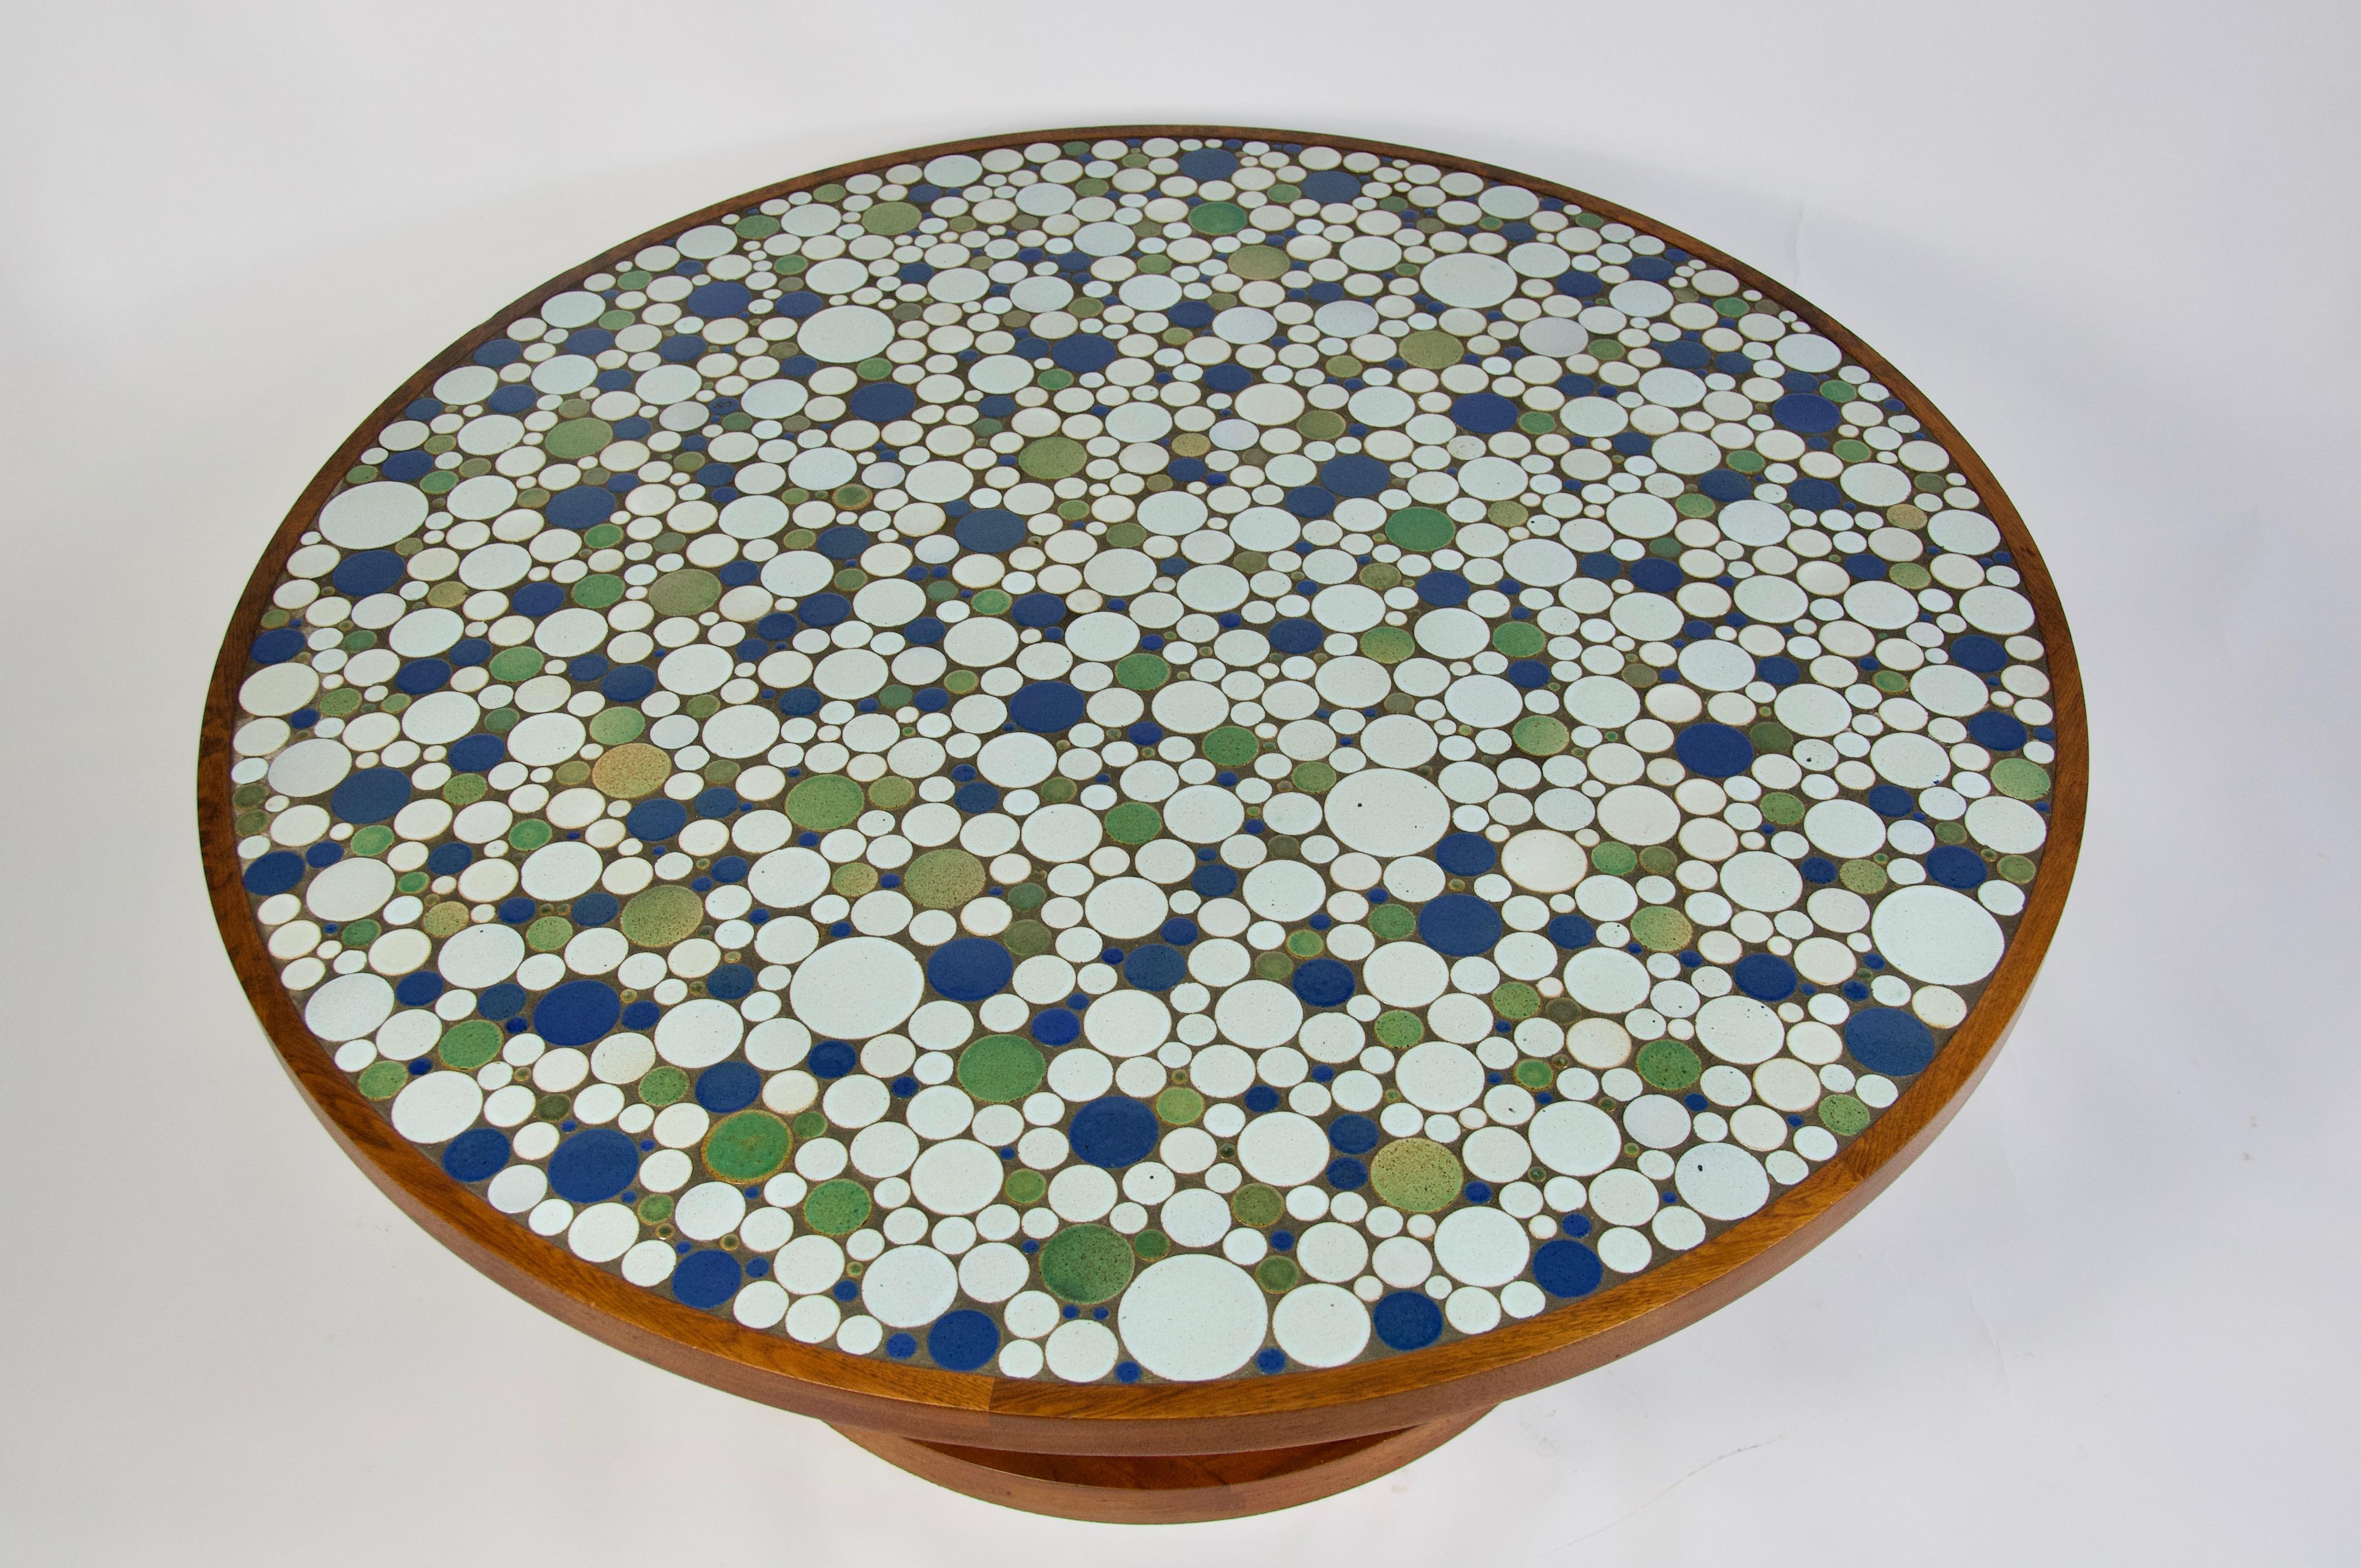 American Ceramic Tile-Top Coffee Table by Gordon and Jane Martz